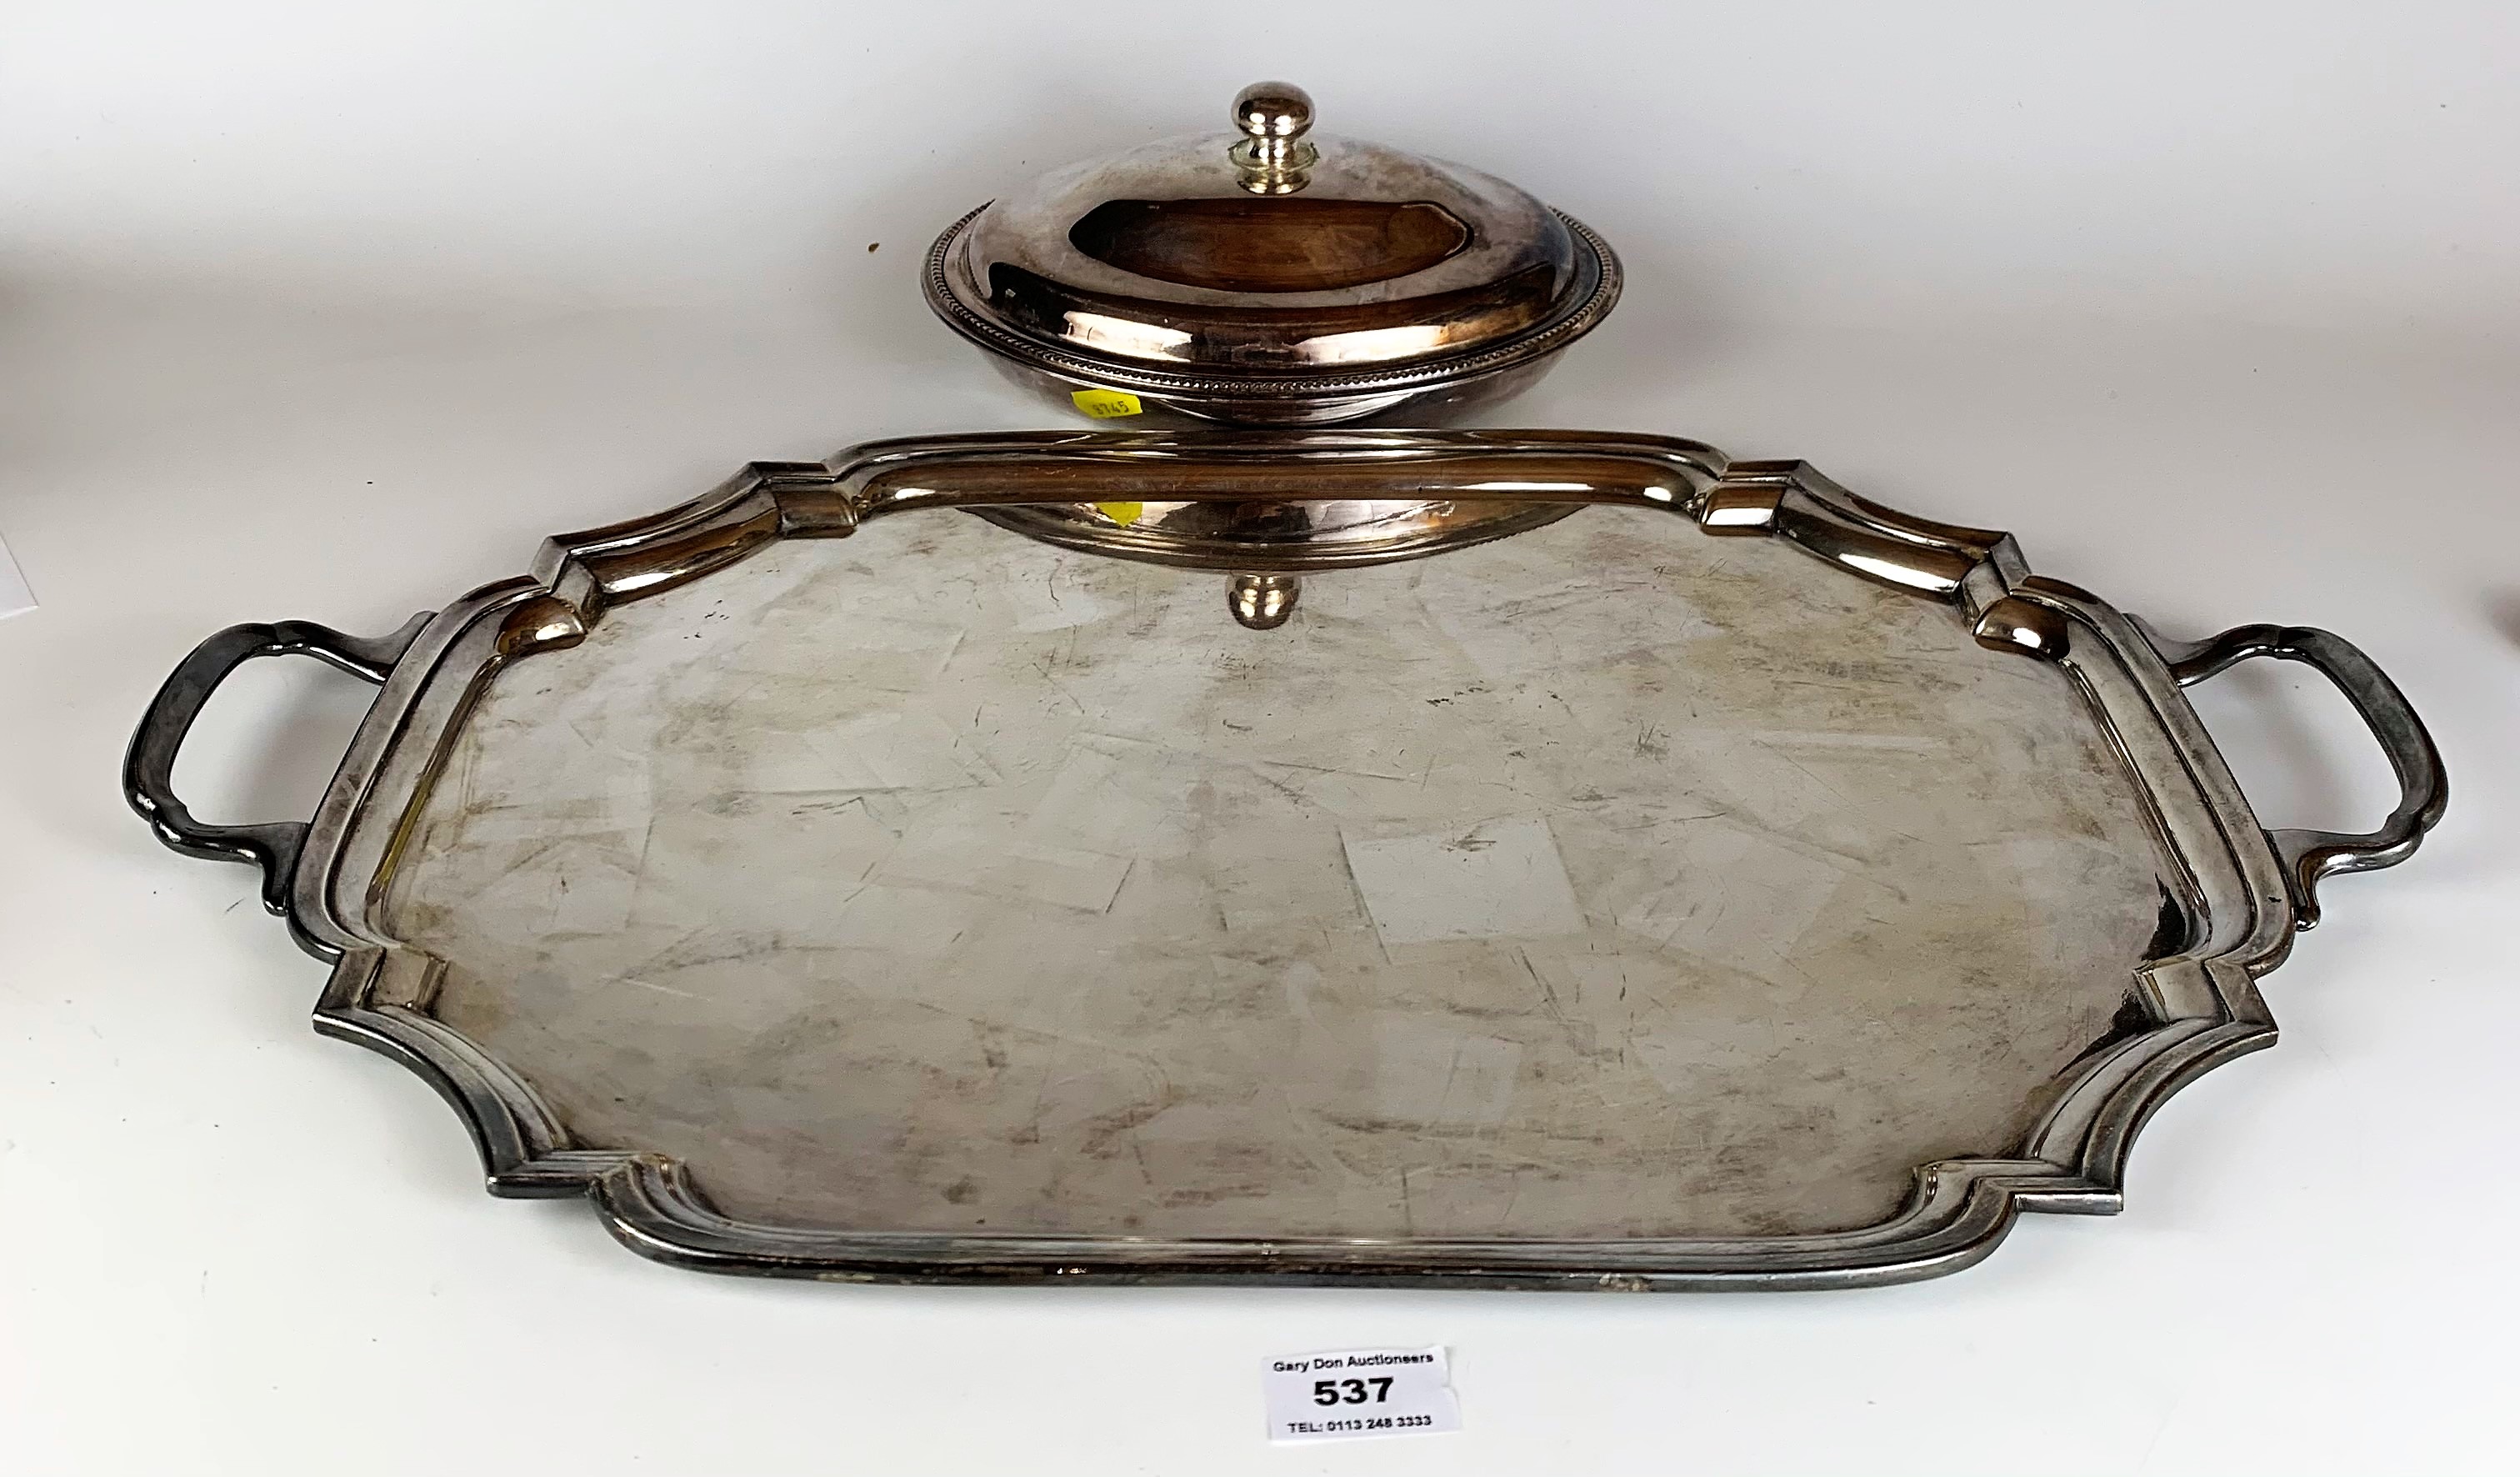 Plated gallery tray 21.5” long x 14” wide and plated lidded tureen 9.5” x 7.5”